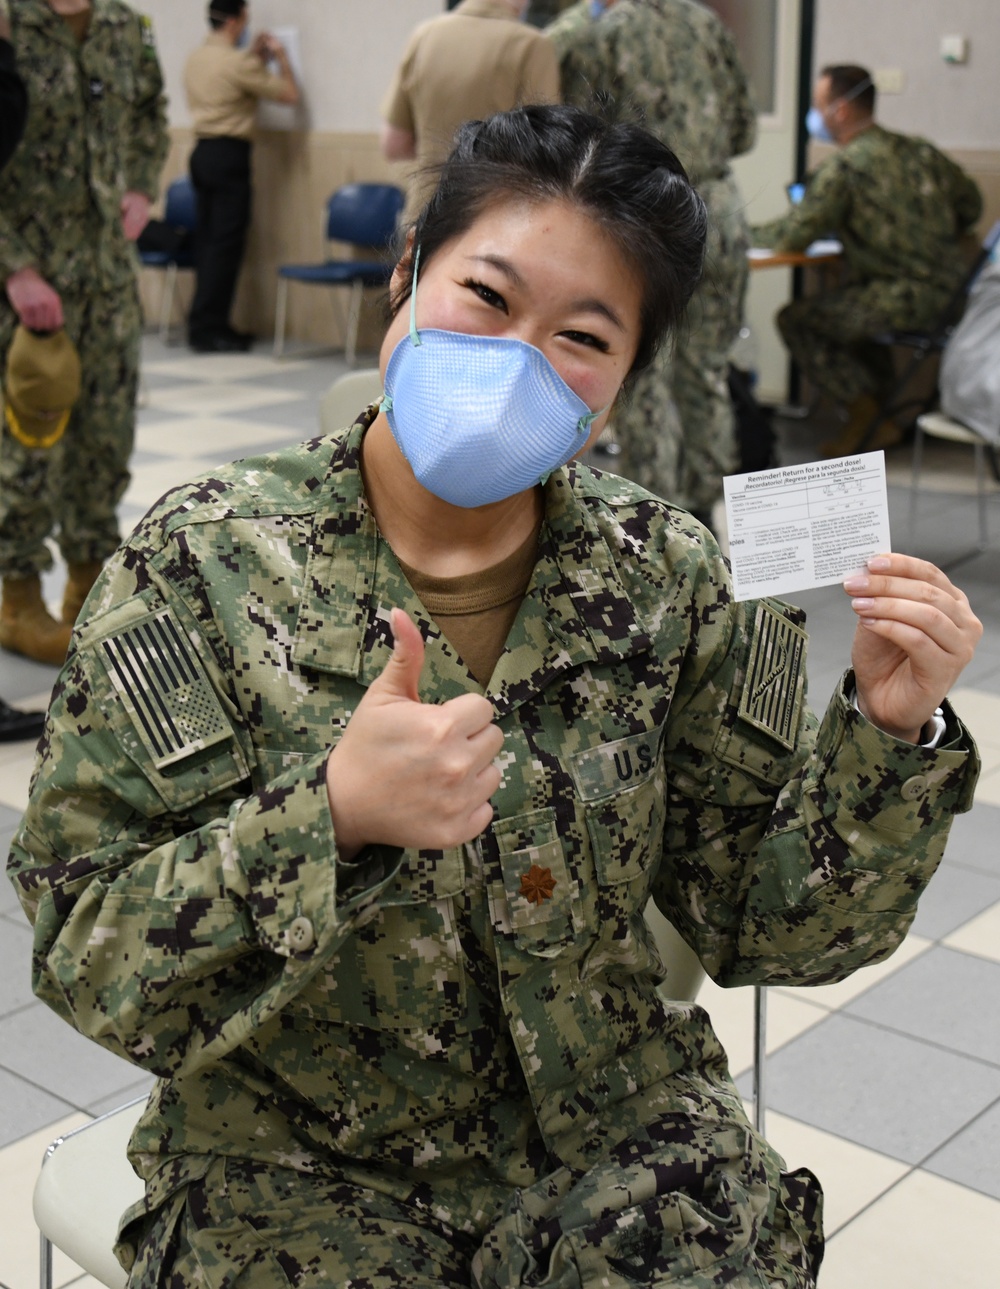 Lt. Cmdr. Kelly Peng, an emergency medicine physician assigned to U.S. Naval Hospital (USNH) Naples, is all smiles after completing the Moderna coronavirus (COVID-19) vaccine observation period